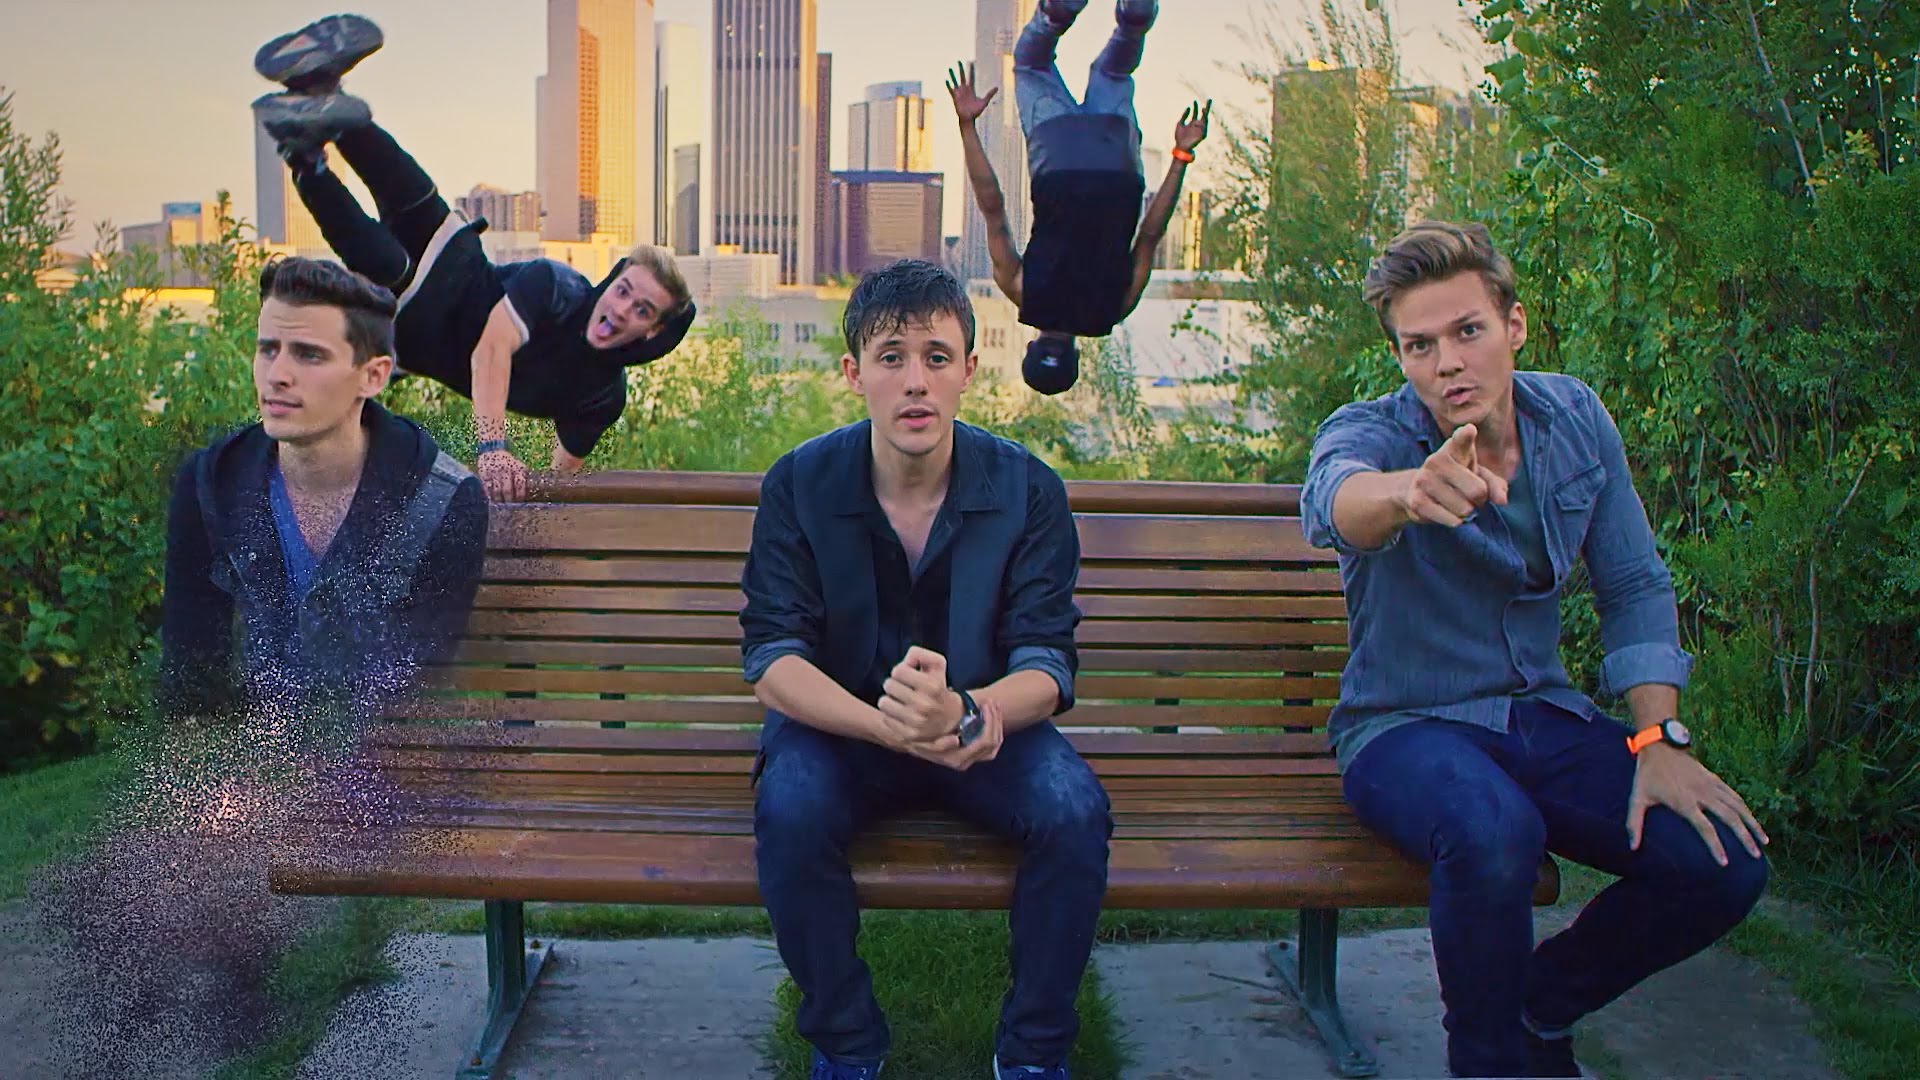 Tyler Ward, Mike Tompkins, KHS – All Time